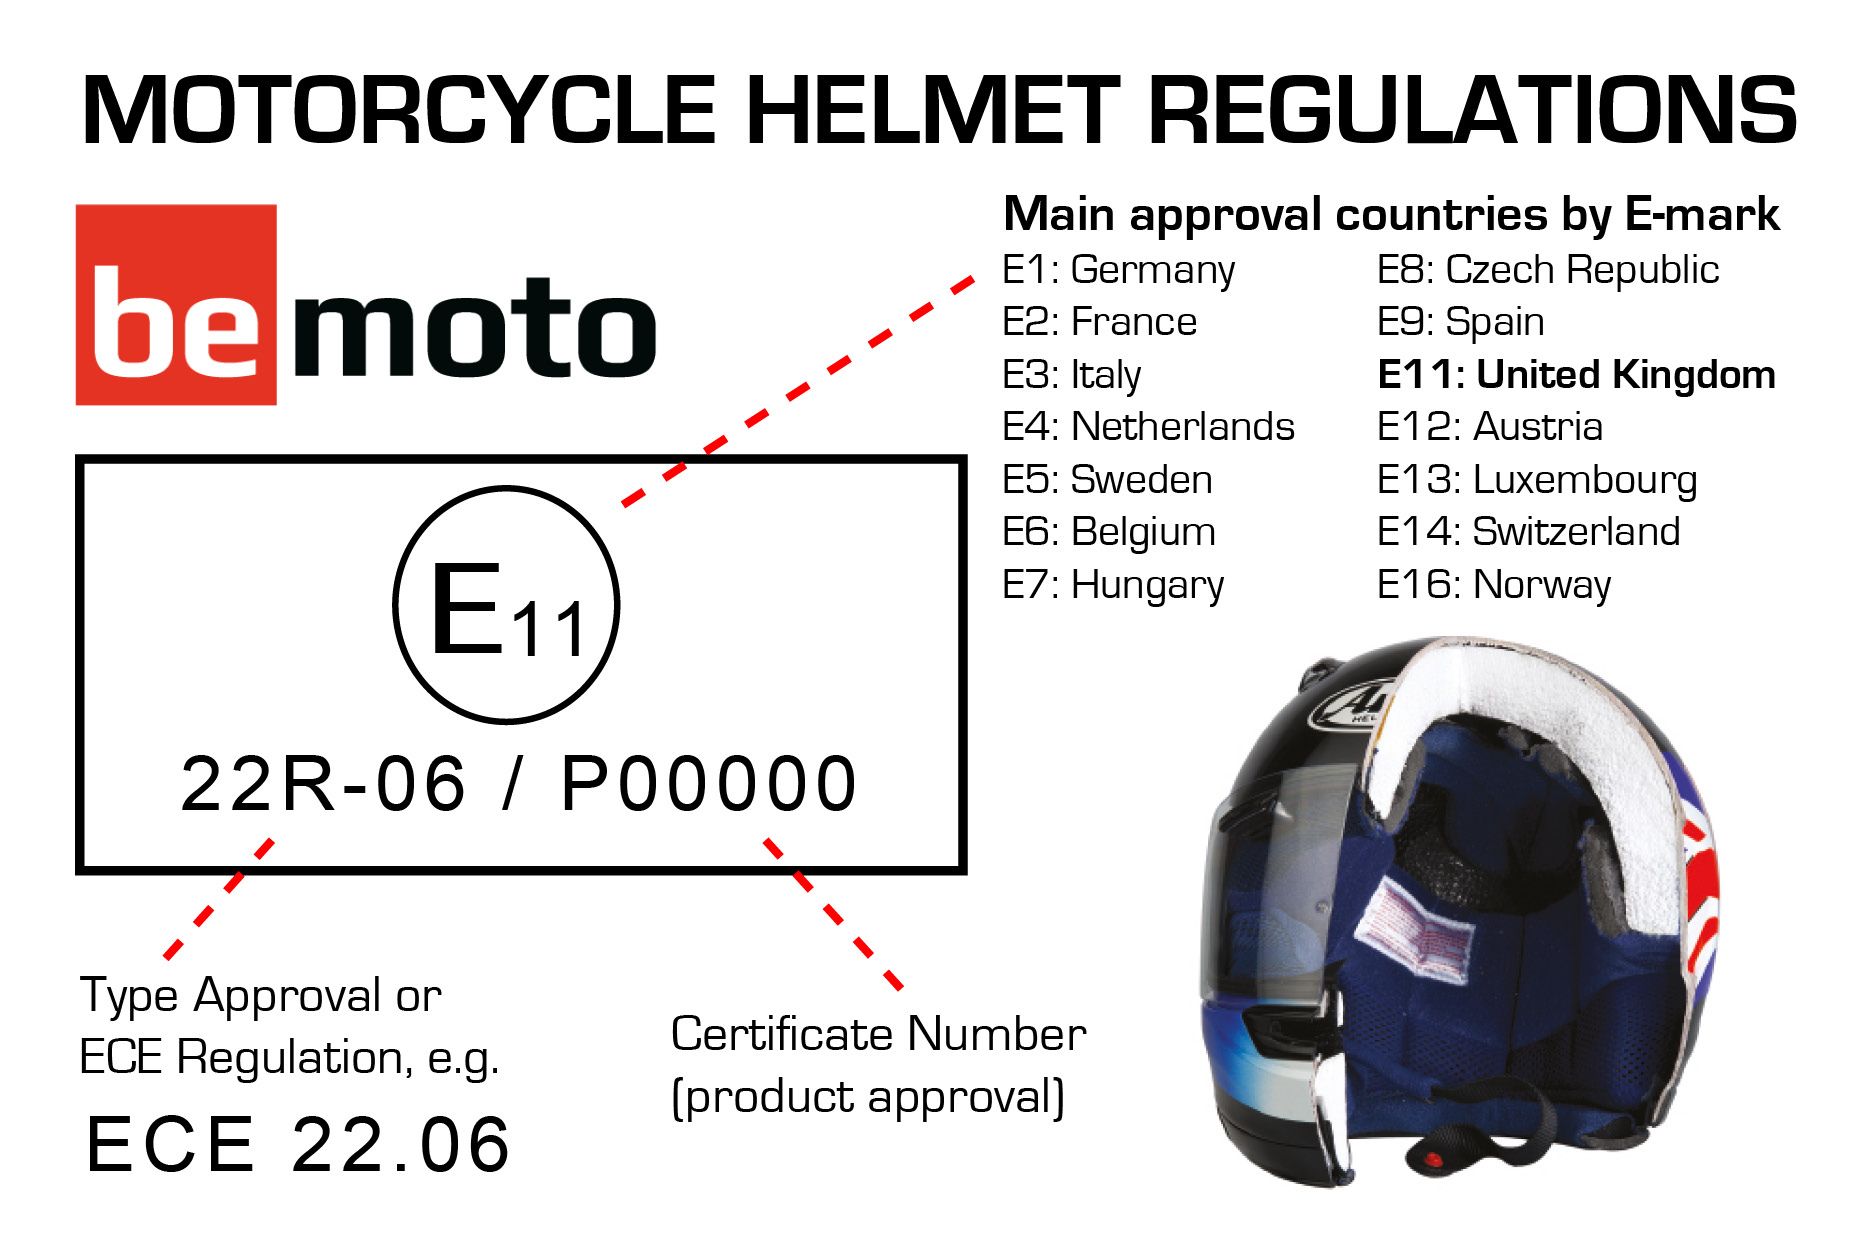 IV. Key Features and Requirements of Motorcycle Helmet Safety Standards